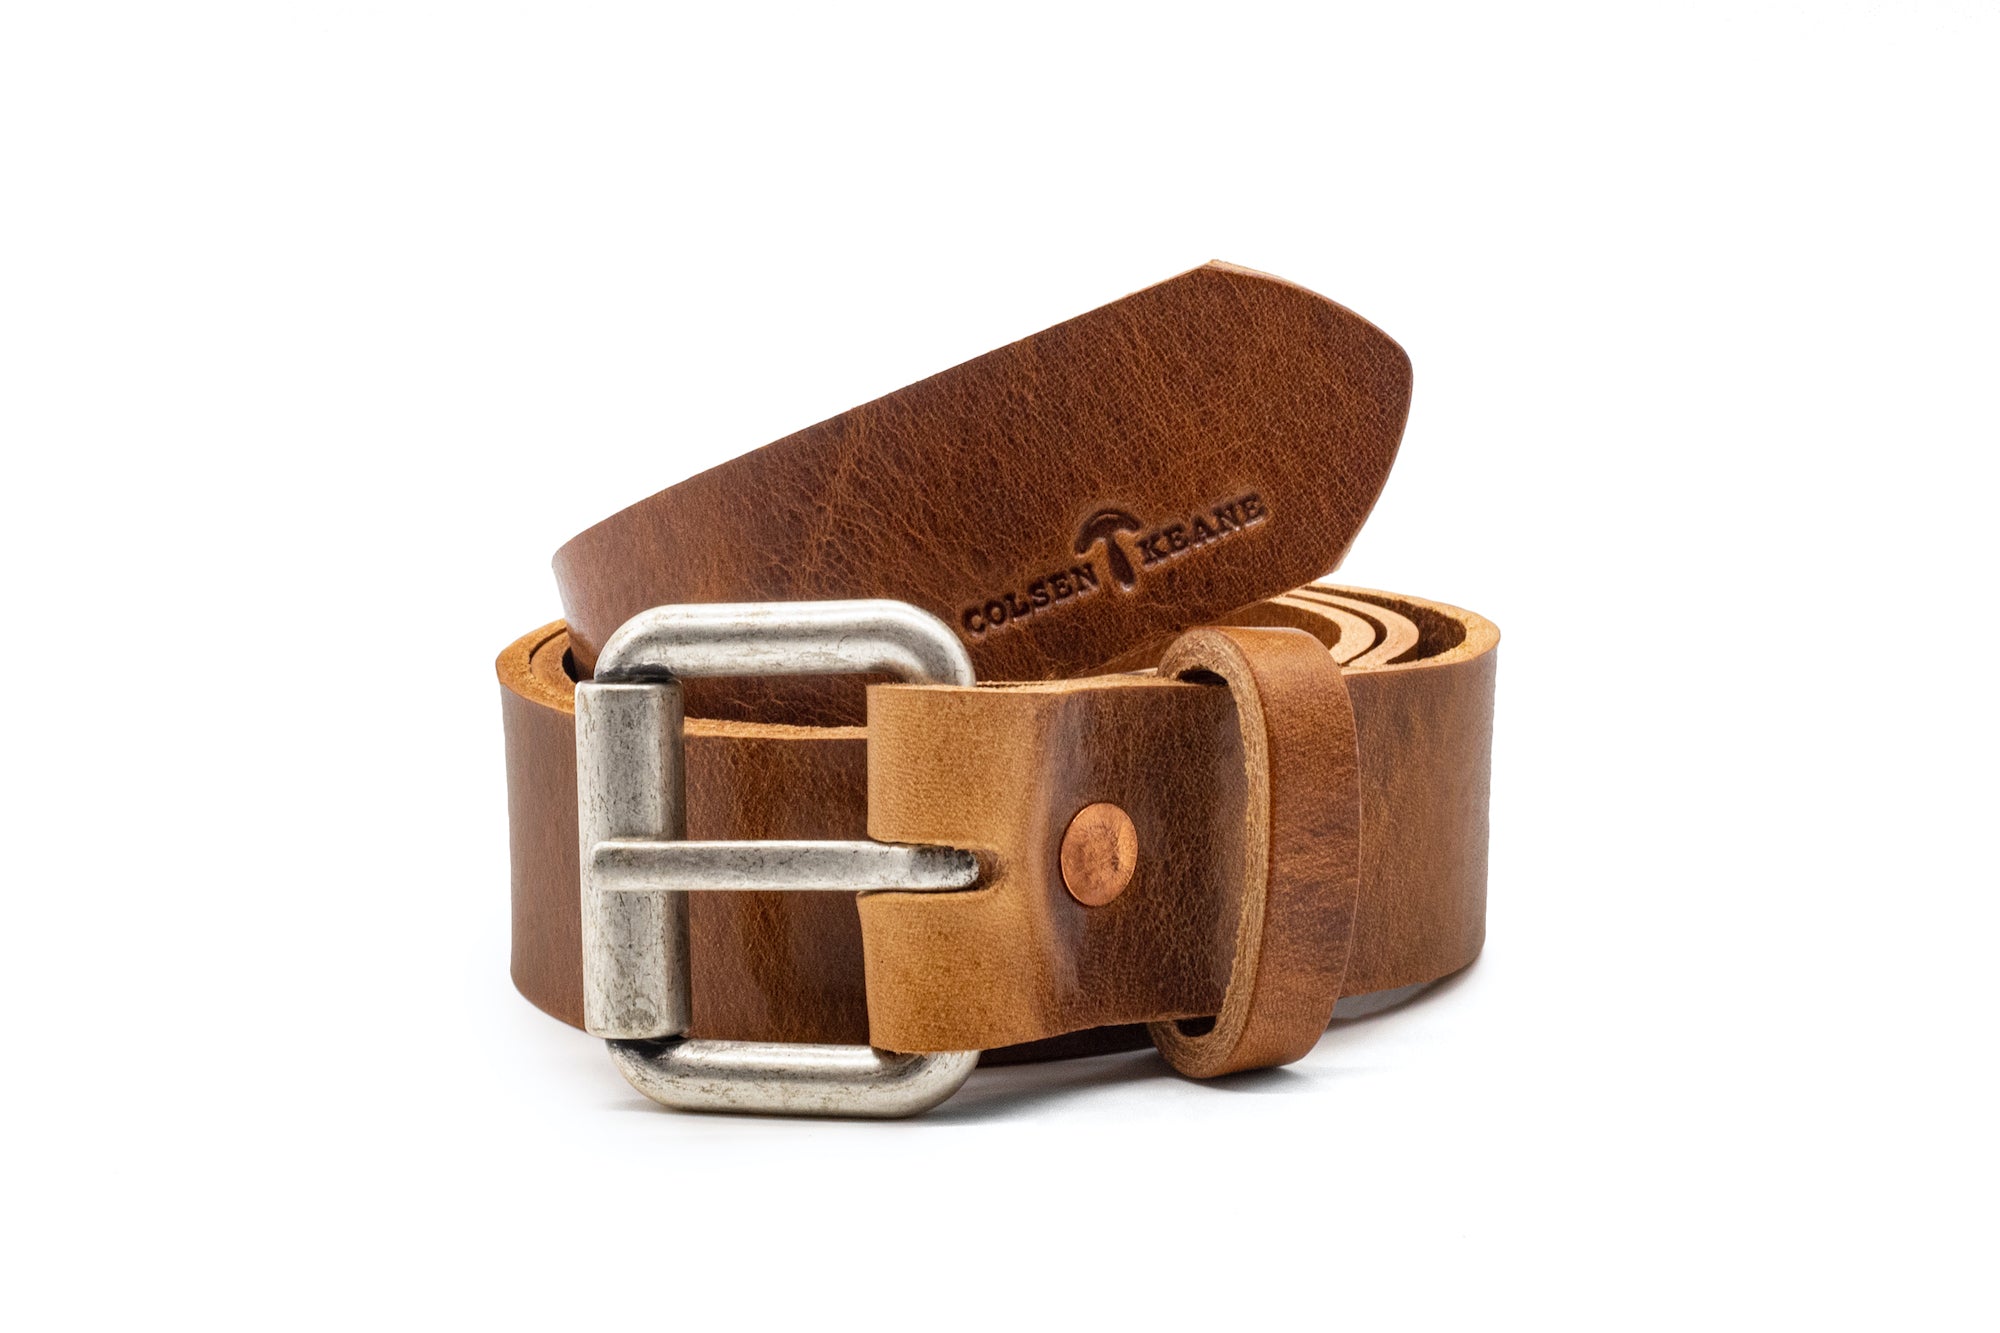 Limited Edition No. 914 Work Belt in Glazed Montana - 9 MADE, ONLY 3 LEFT